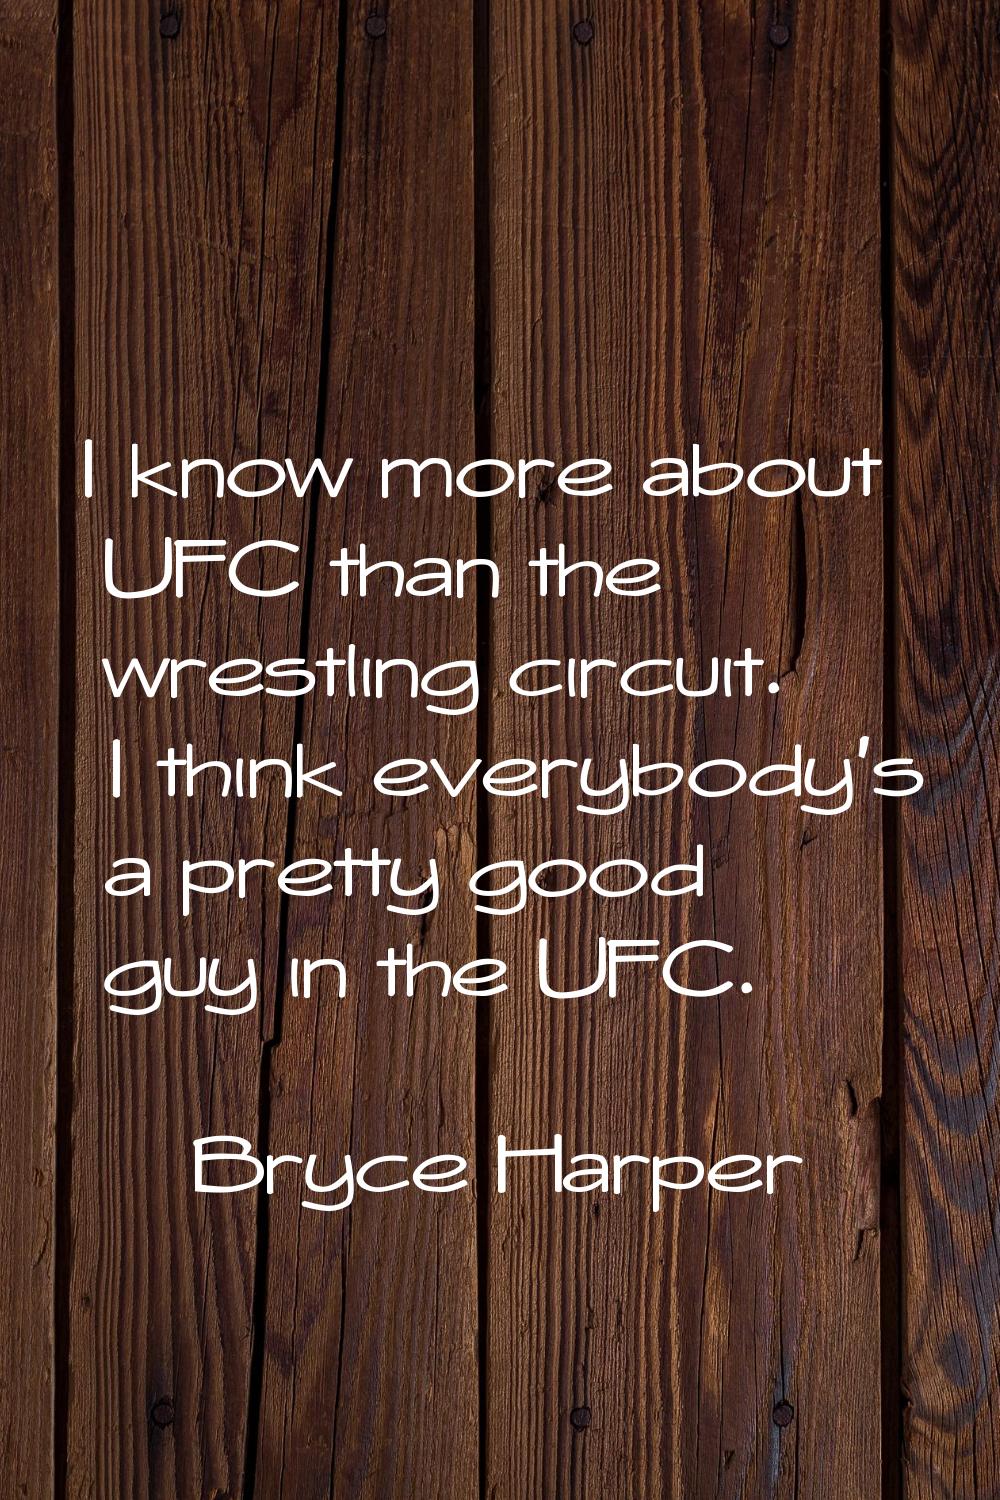 I know more about UFC than the wrestling circuit. I think everybody's a pretty good guy in the UFC.